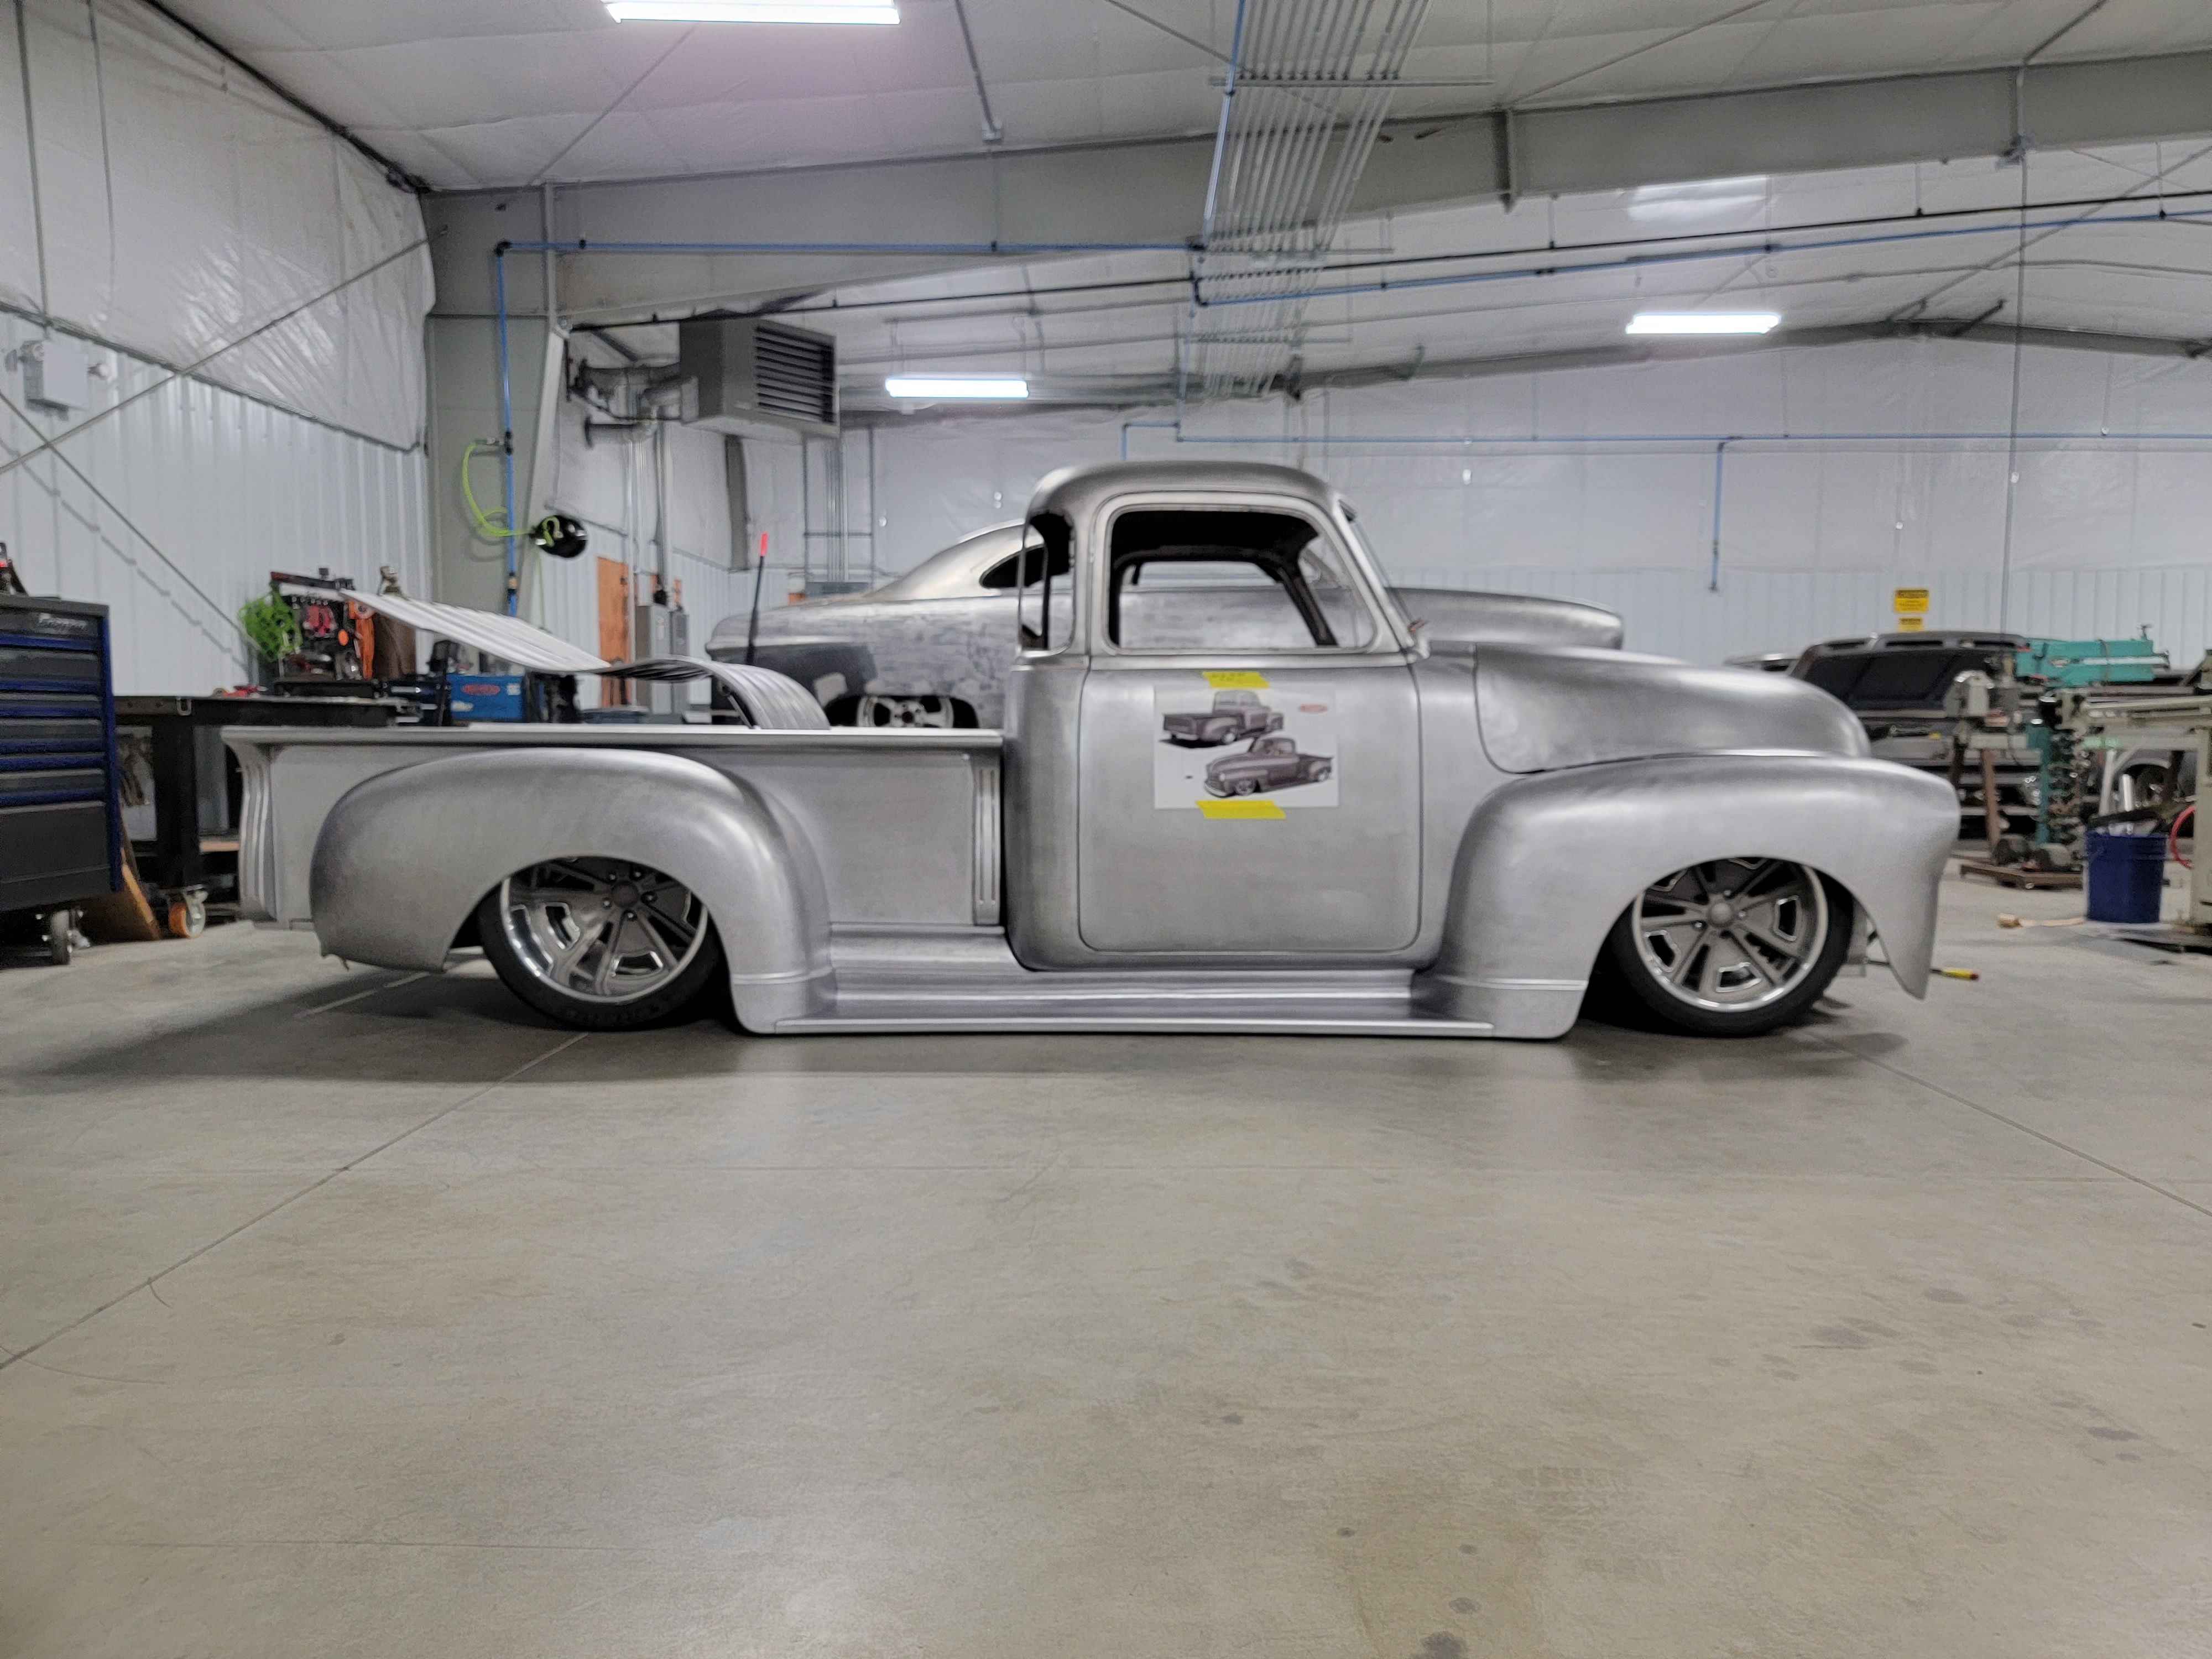 scotts-hotrods-51-chevy-project-truck-2667